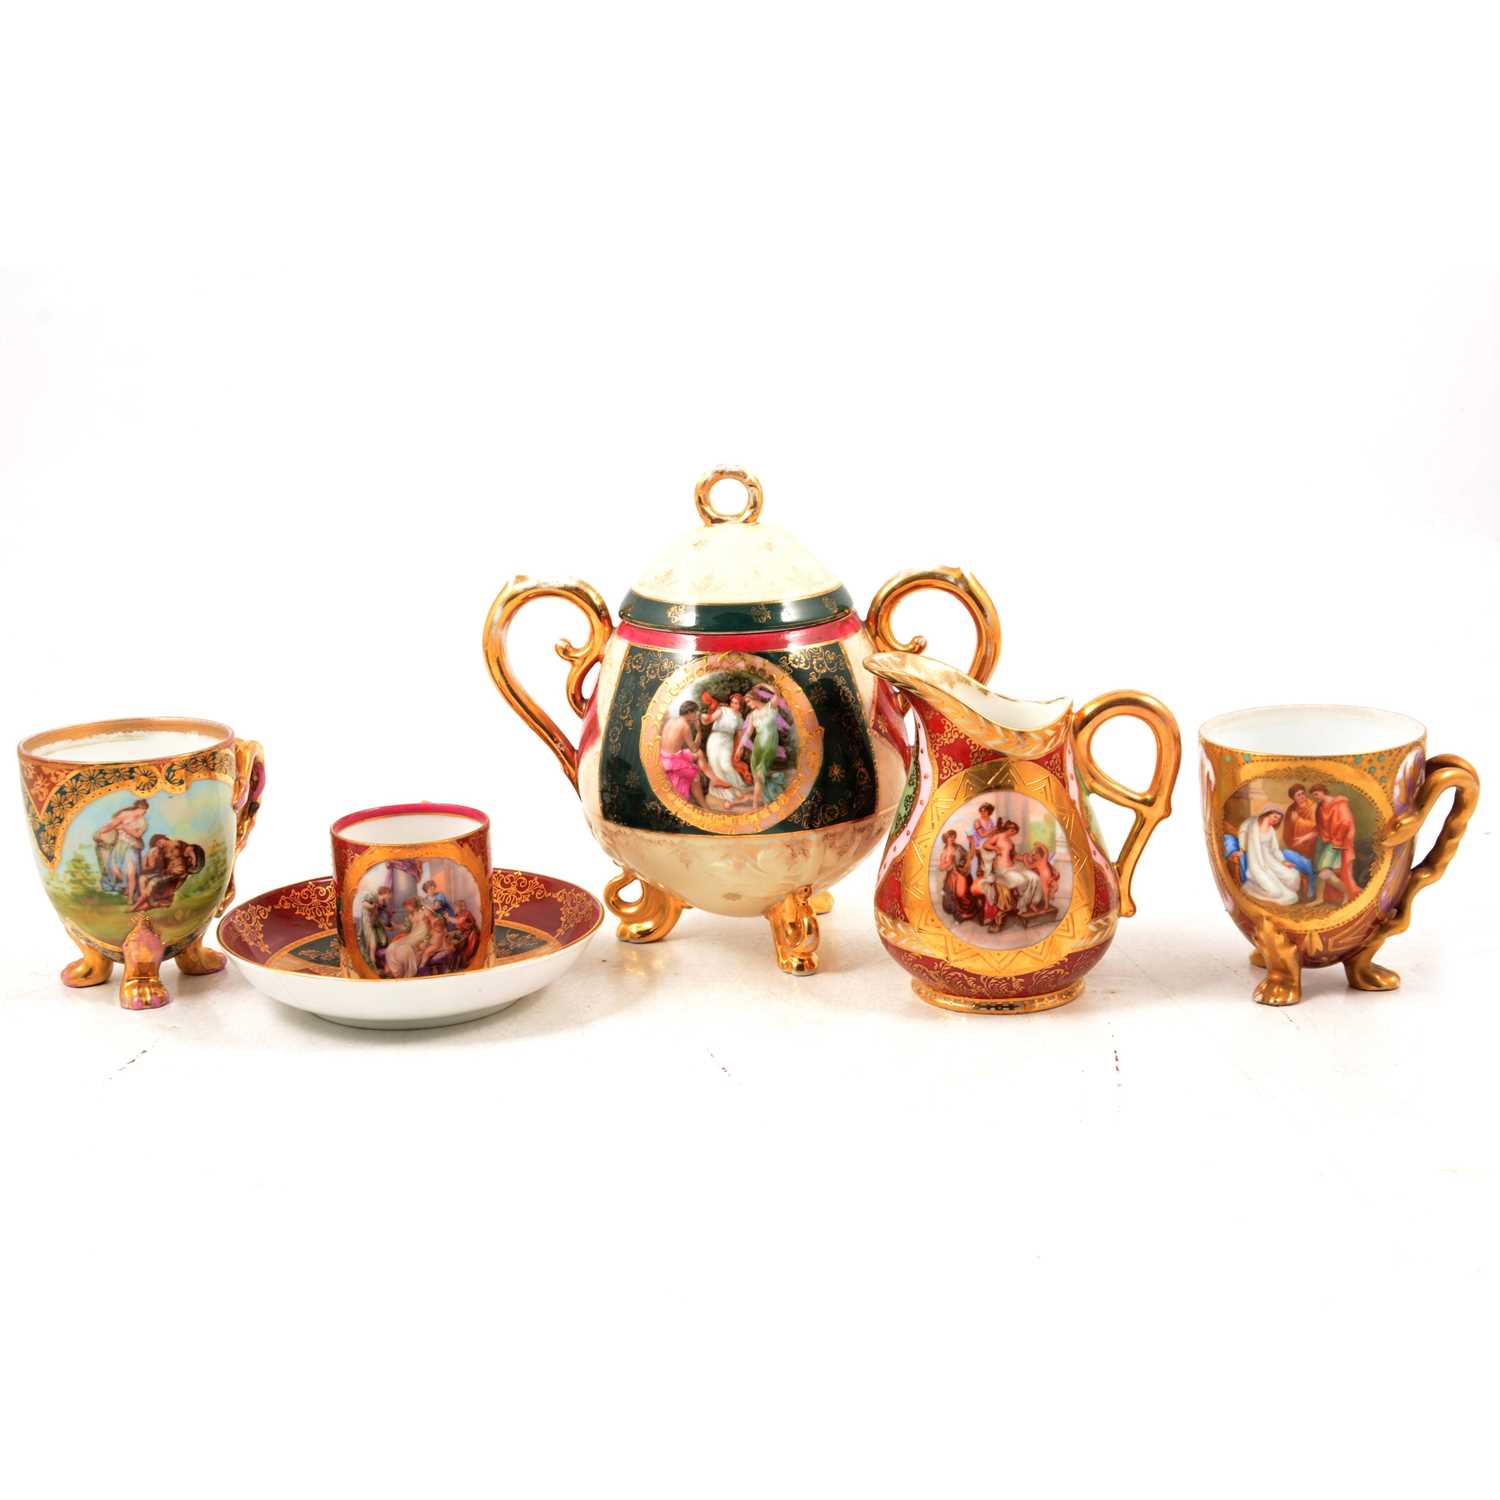 Lot 45 - Collection of decorative Royal Vienna tableware